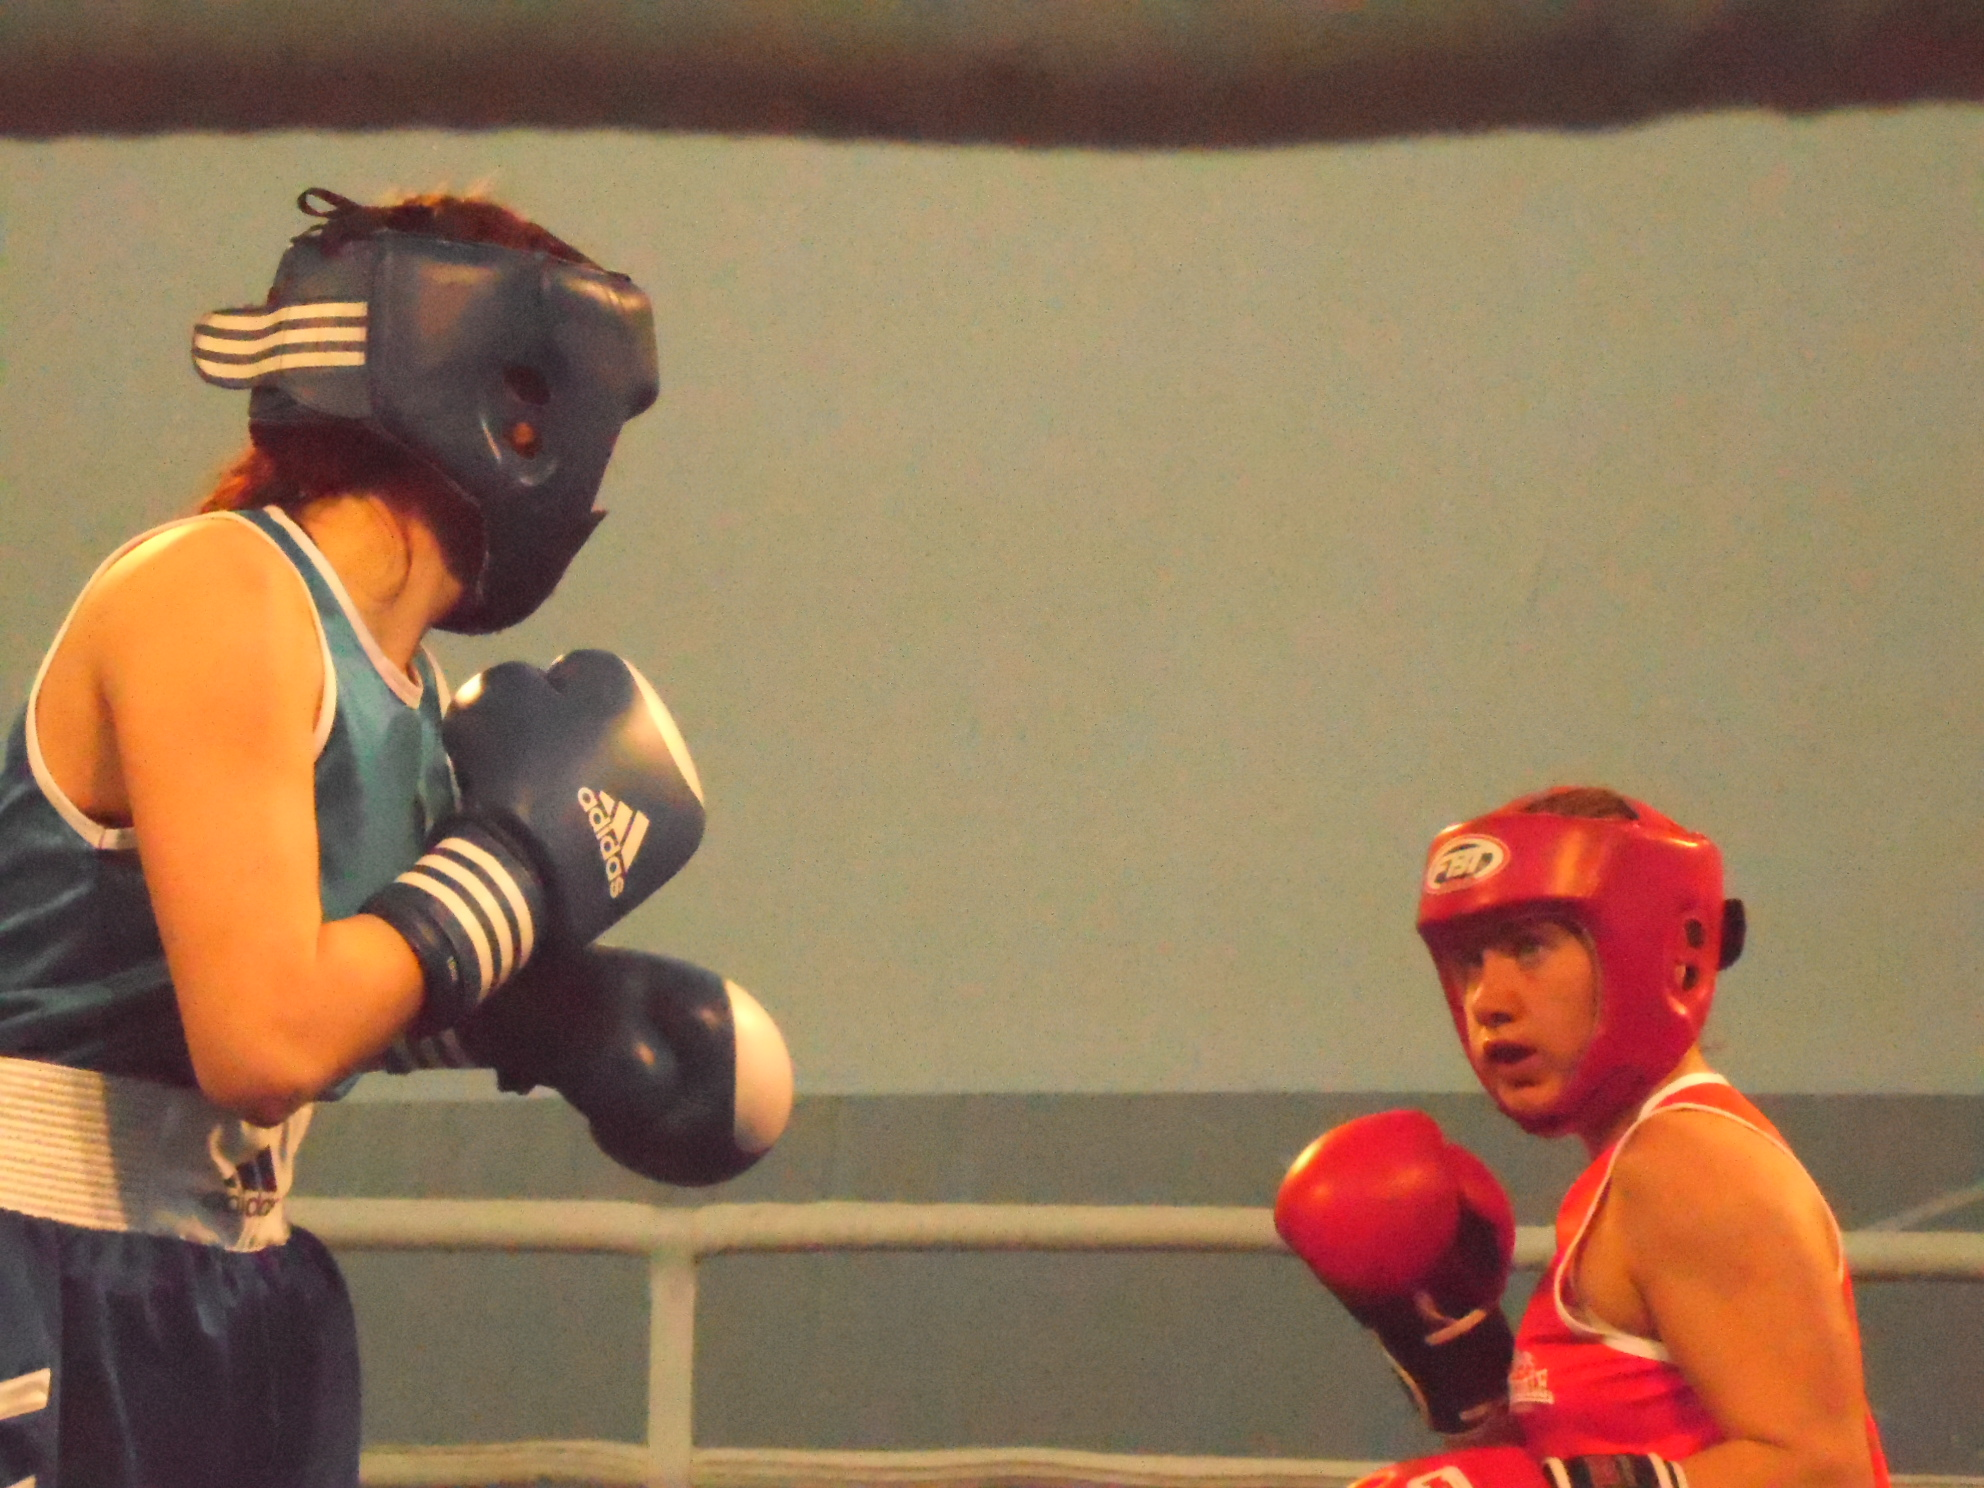 A women dressed in blue athletic attire and headgear (foreground) about to punch another woman wearing similar attire in red